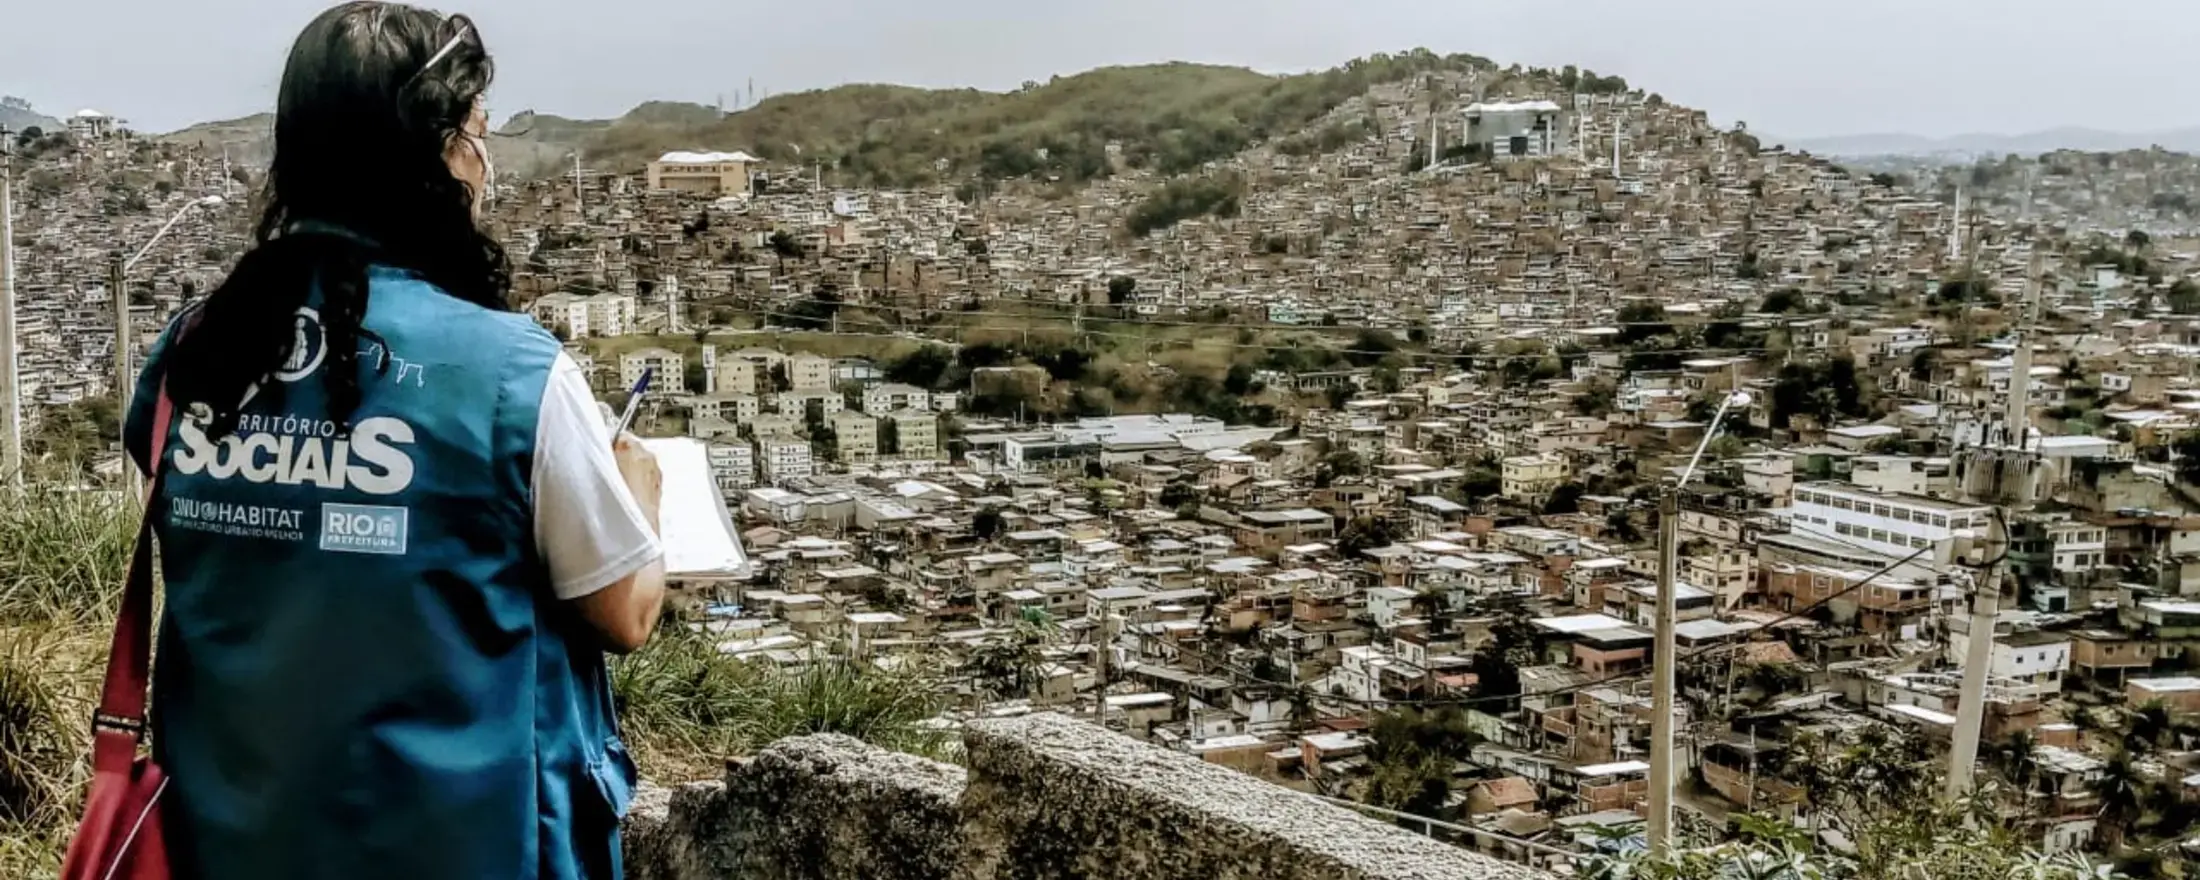 UN-HABITAT STAFF TAKING PART IN A PROJECT TO IDENTIFY THE MOST VULNERABLE IN COMPLEXO DO ALEMÃO’S  SLUM FOR SOCIAL TERRITORIES PROGRAMME PROJECT FUNDED BY THE MUNICIPALITY OF RIO DE JANEIRO 2019 PHOTO: UN-HABITAT BRAZIL